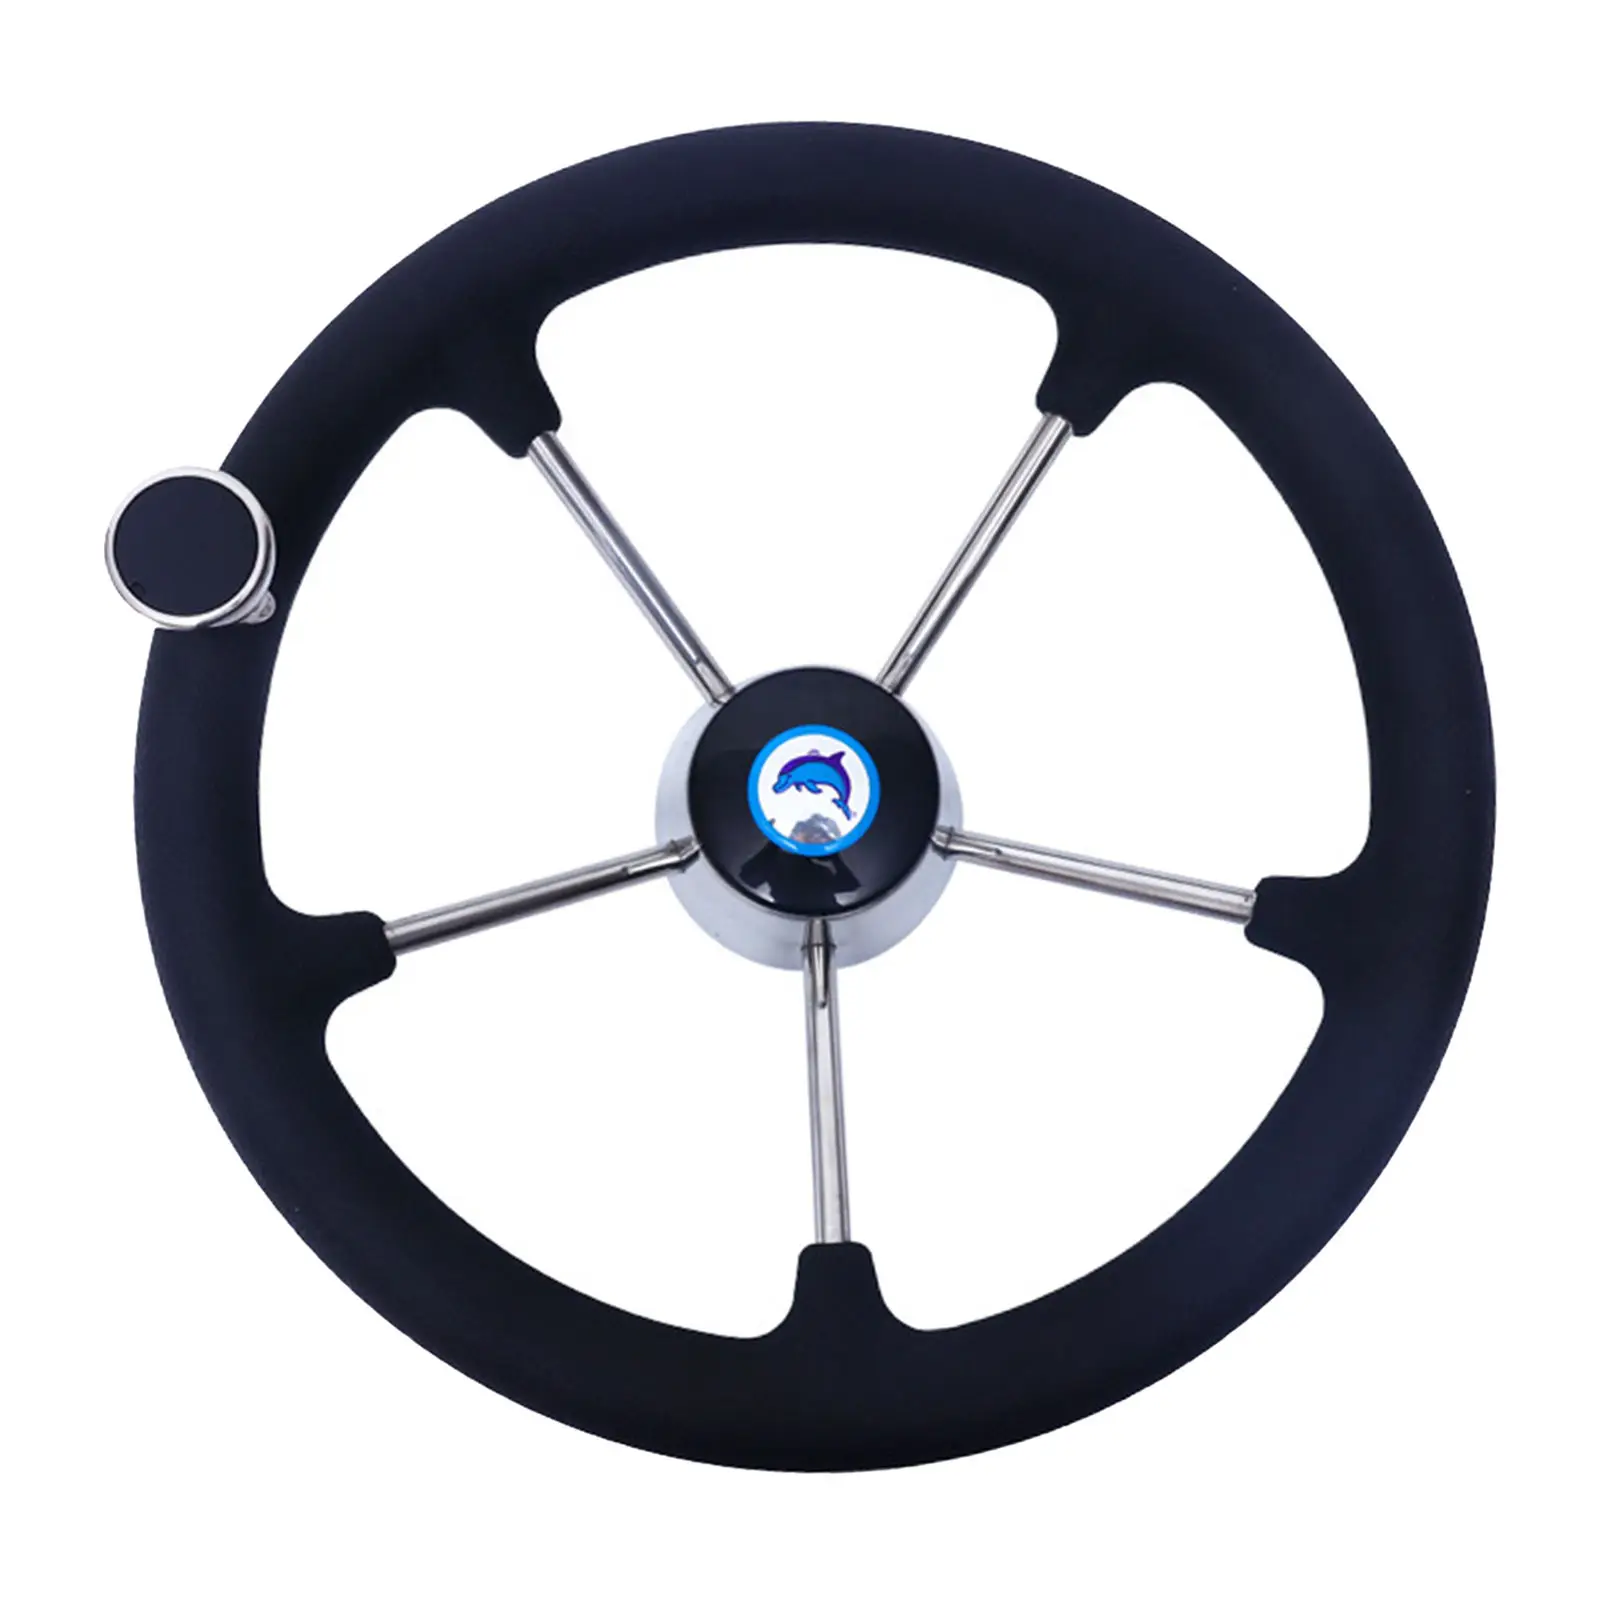 Boat Accessories Marine 13-1/2' Boat Stainless steel Steering Wheel with Polyurethane Foam Black Excellent feel Fits 3/4' Shaft